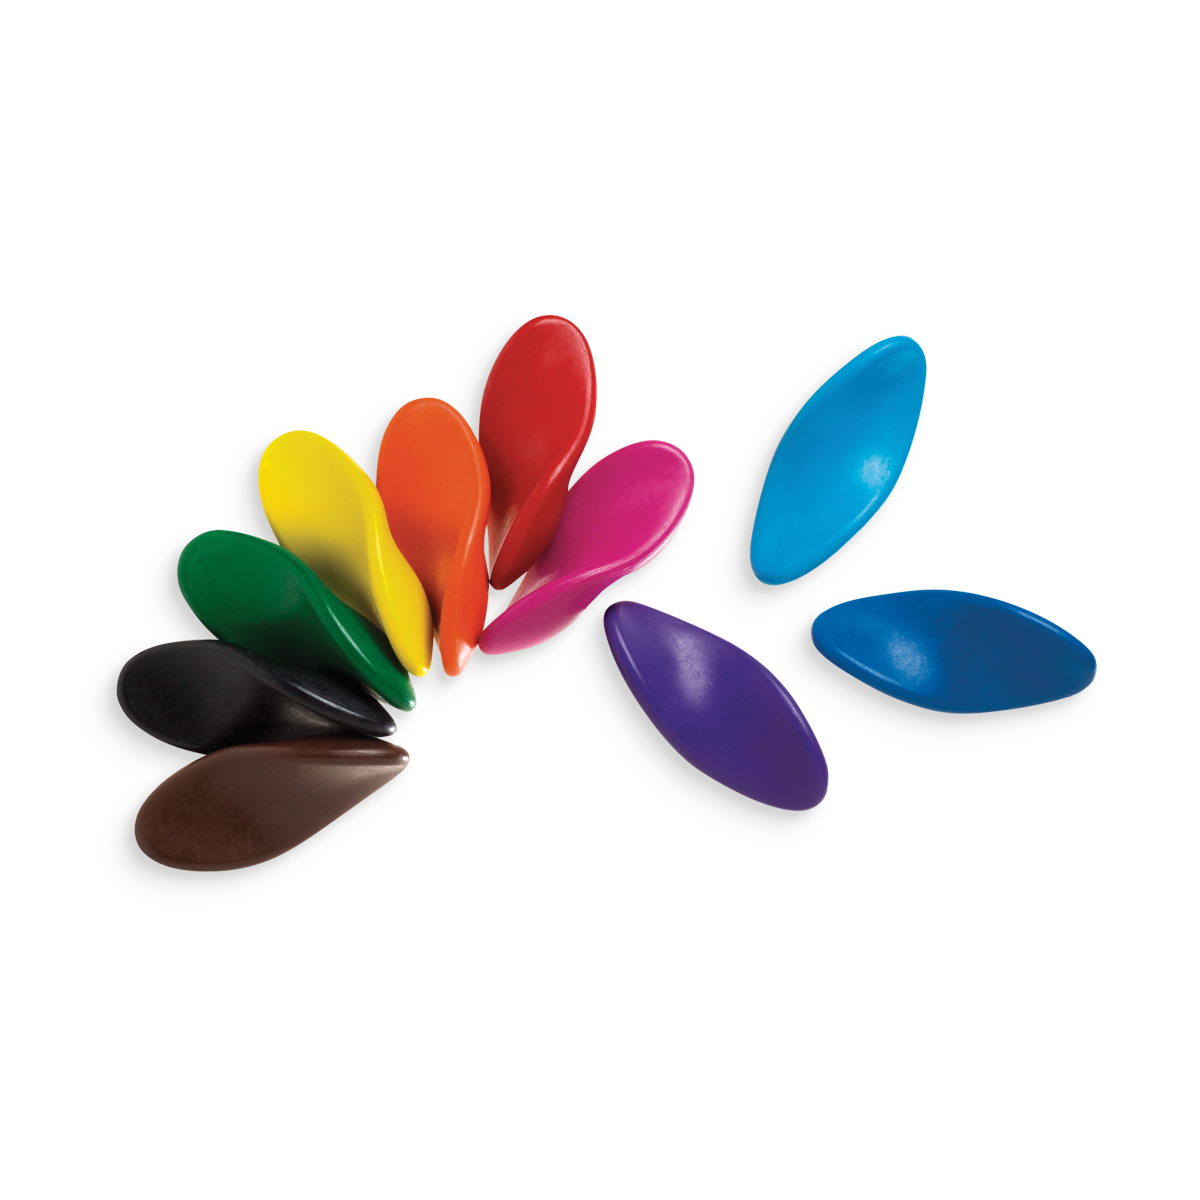 10 Left Right colored ergonomic crayons